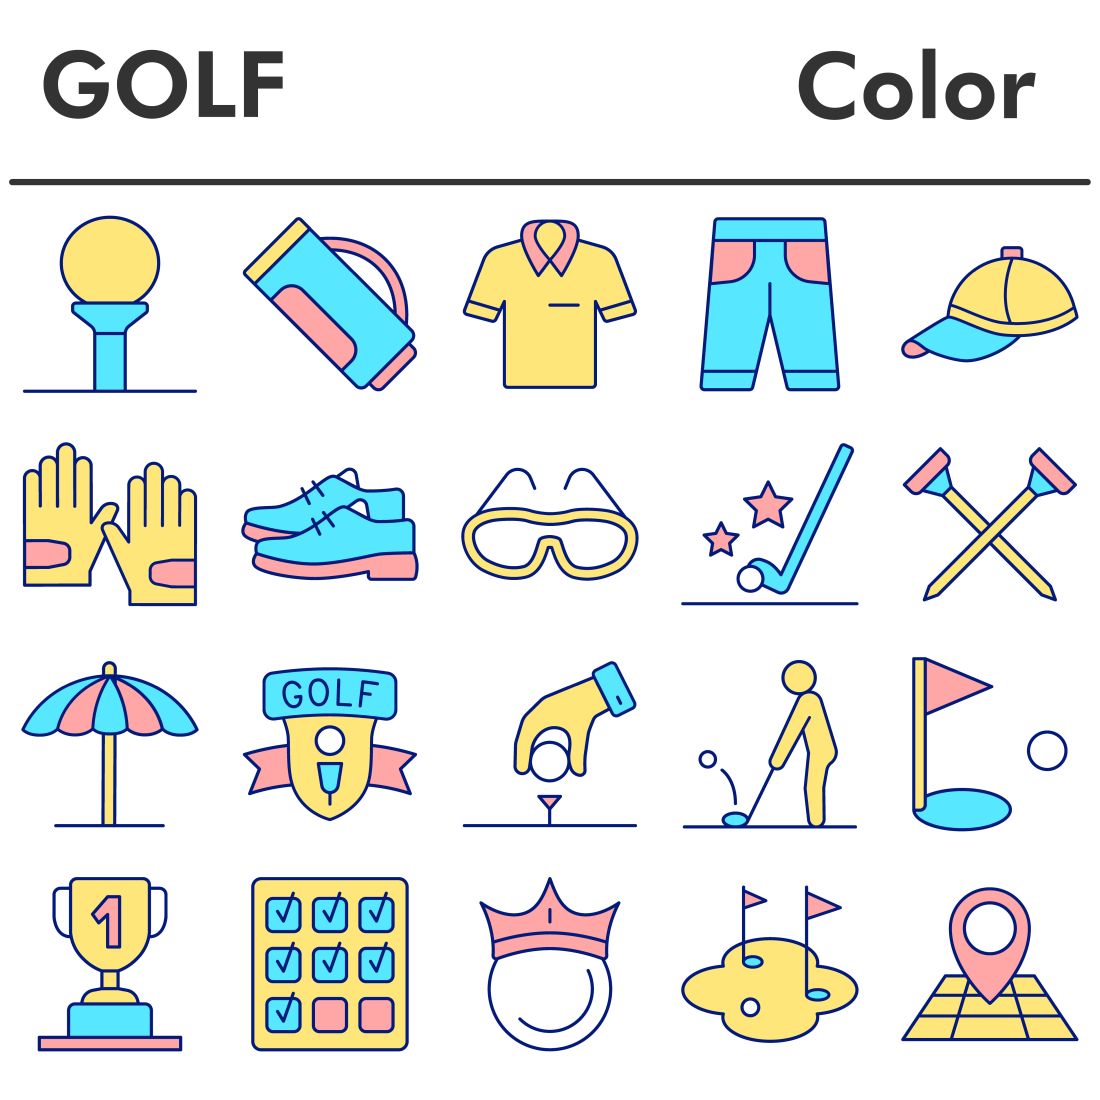 Golf icons set, color style preview image.